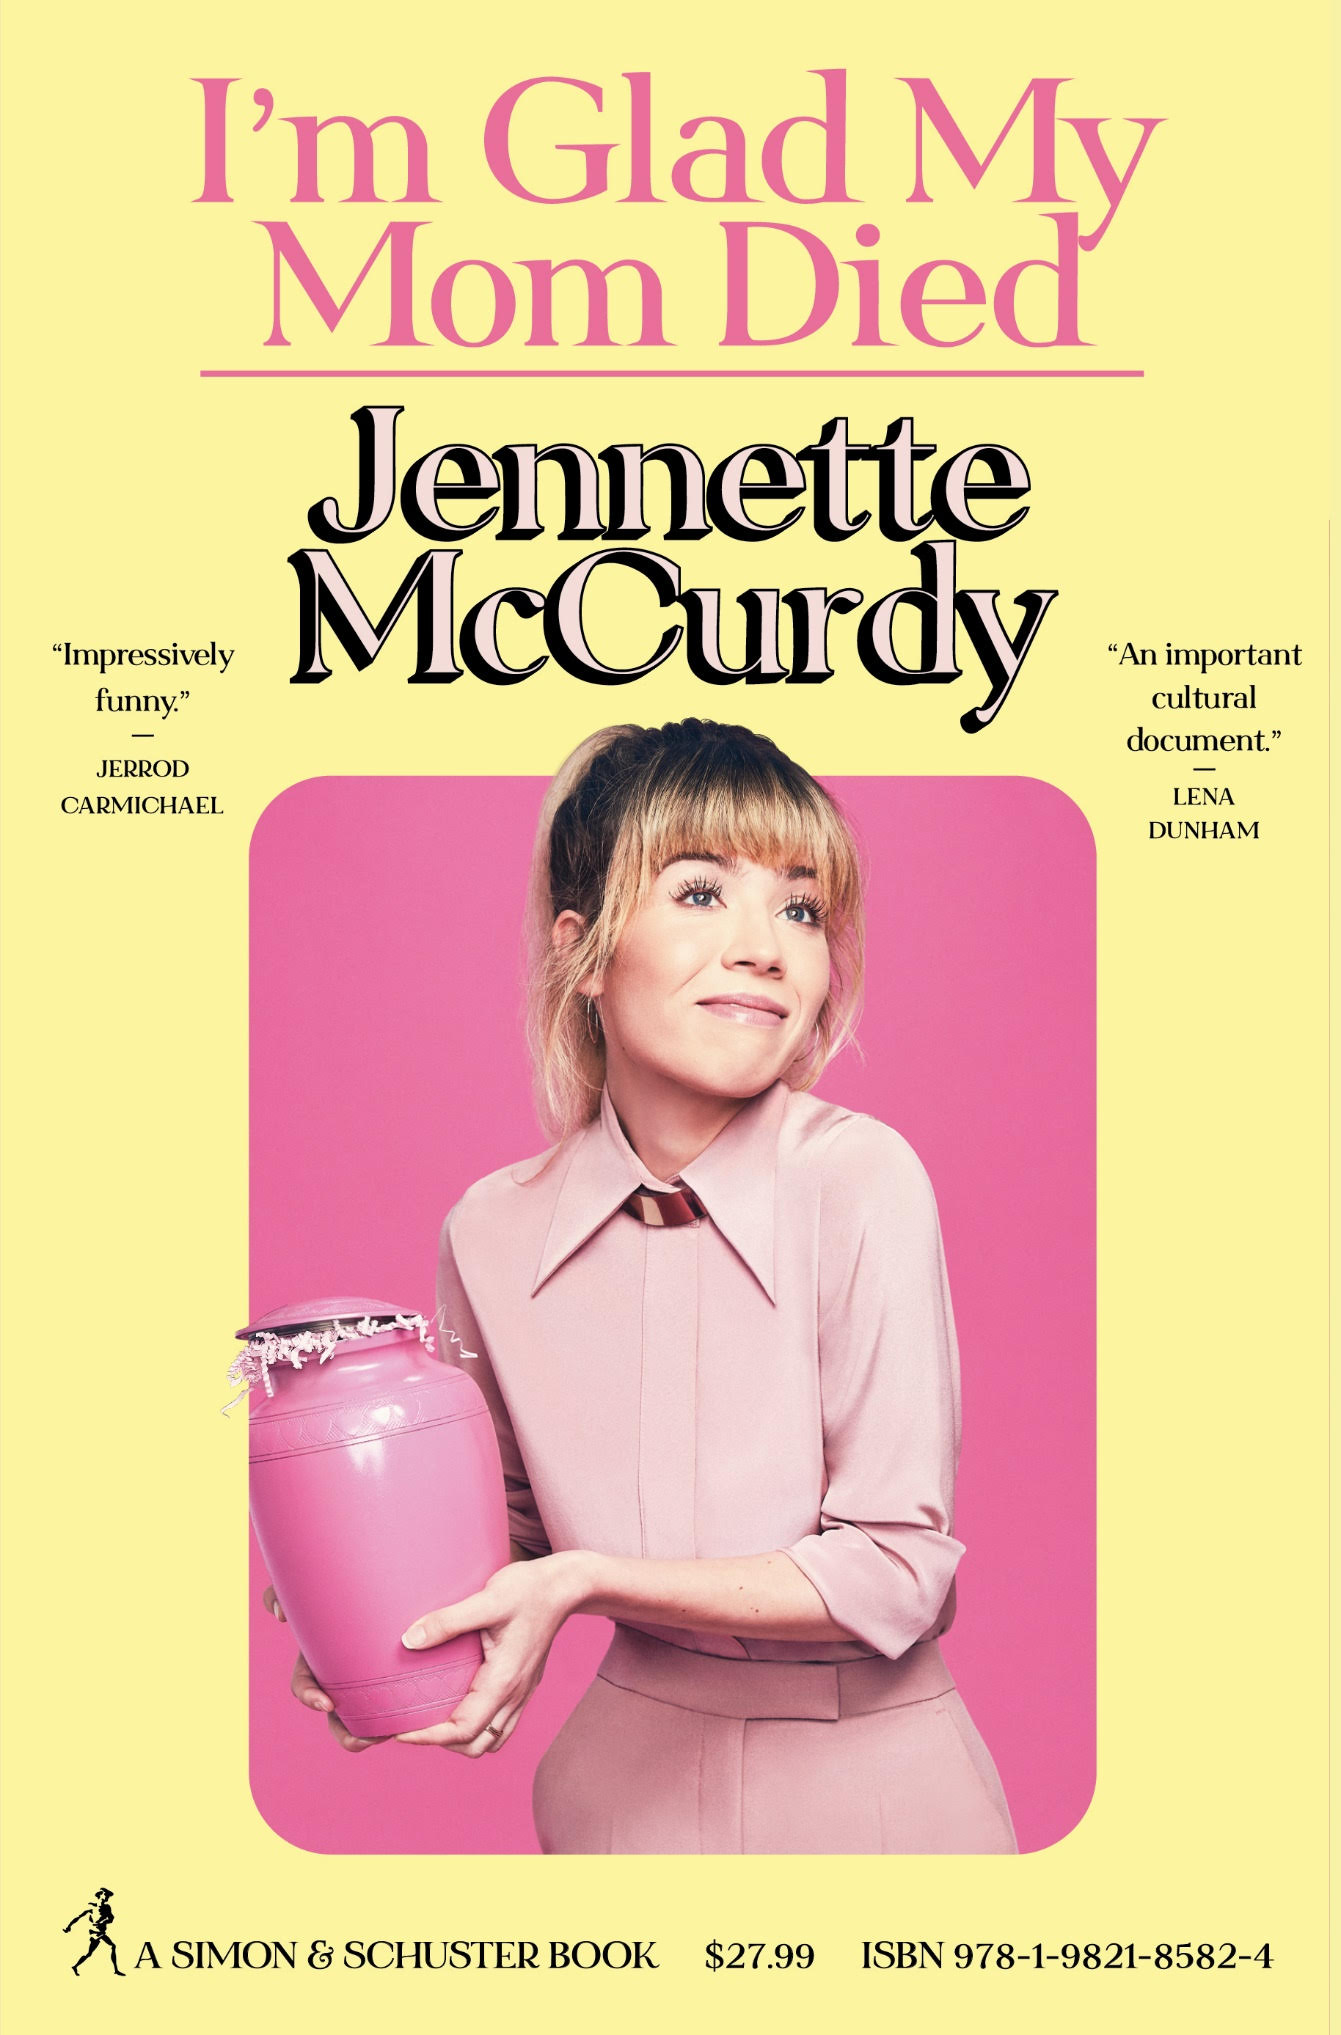 A book cover shows a blonde woman in a pink suit buttoned up to her throat and a high ponytail. She is holding a hot pink urn and shrugging humorously.